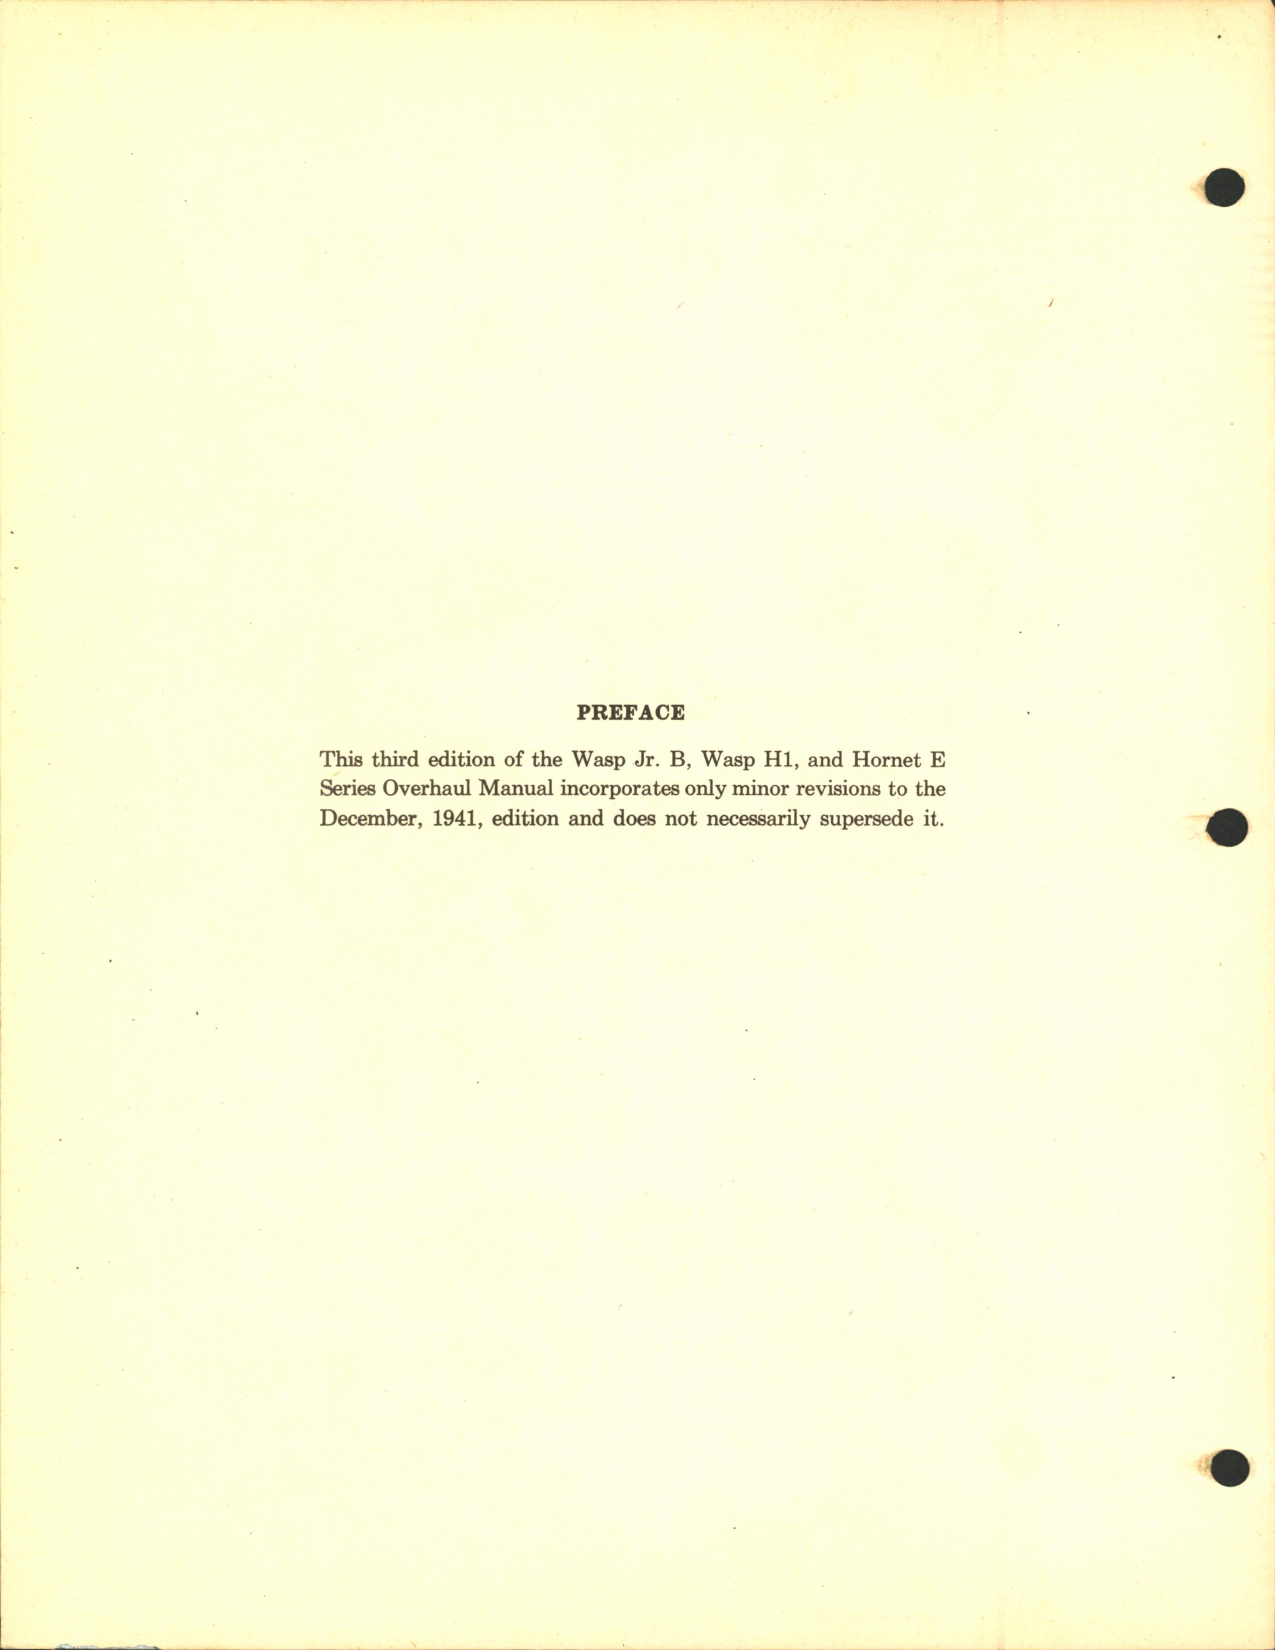 Sample page 4 from AirCorps Library document: Ovh Manual for Wasp Jr B, Wasp H1 and Hornet E Series Engines